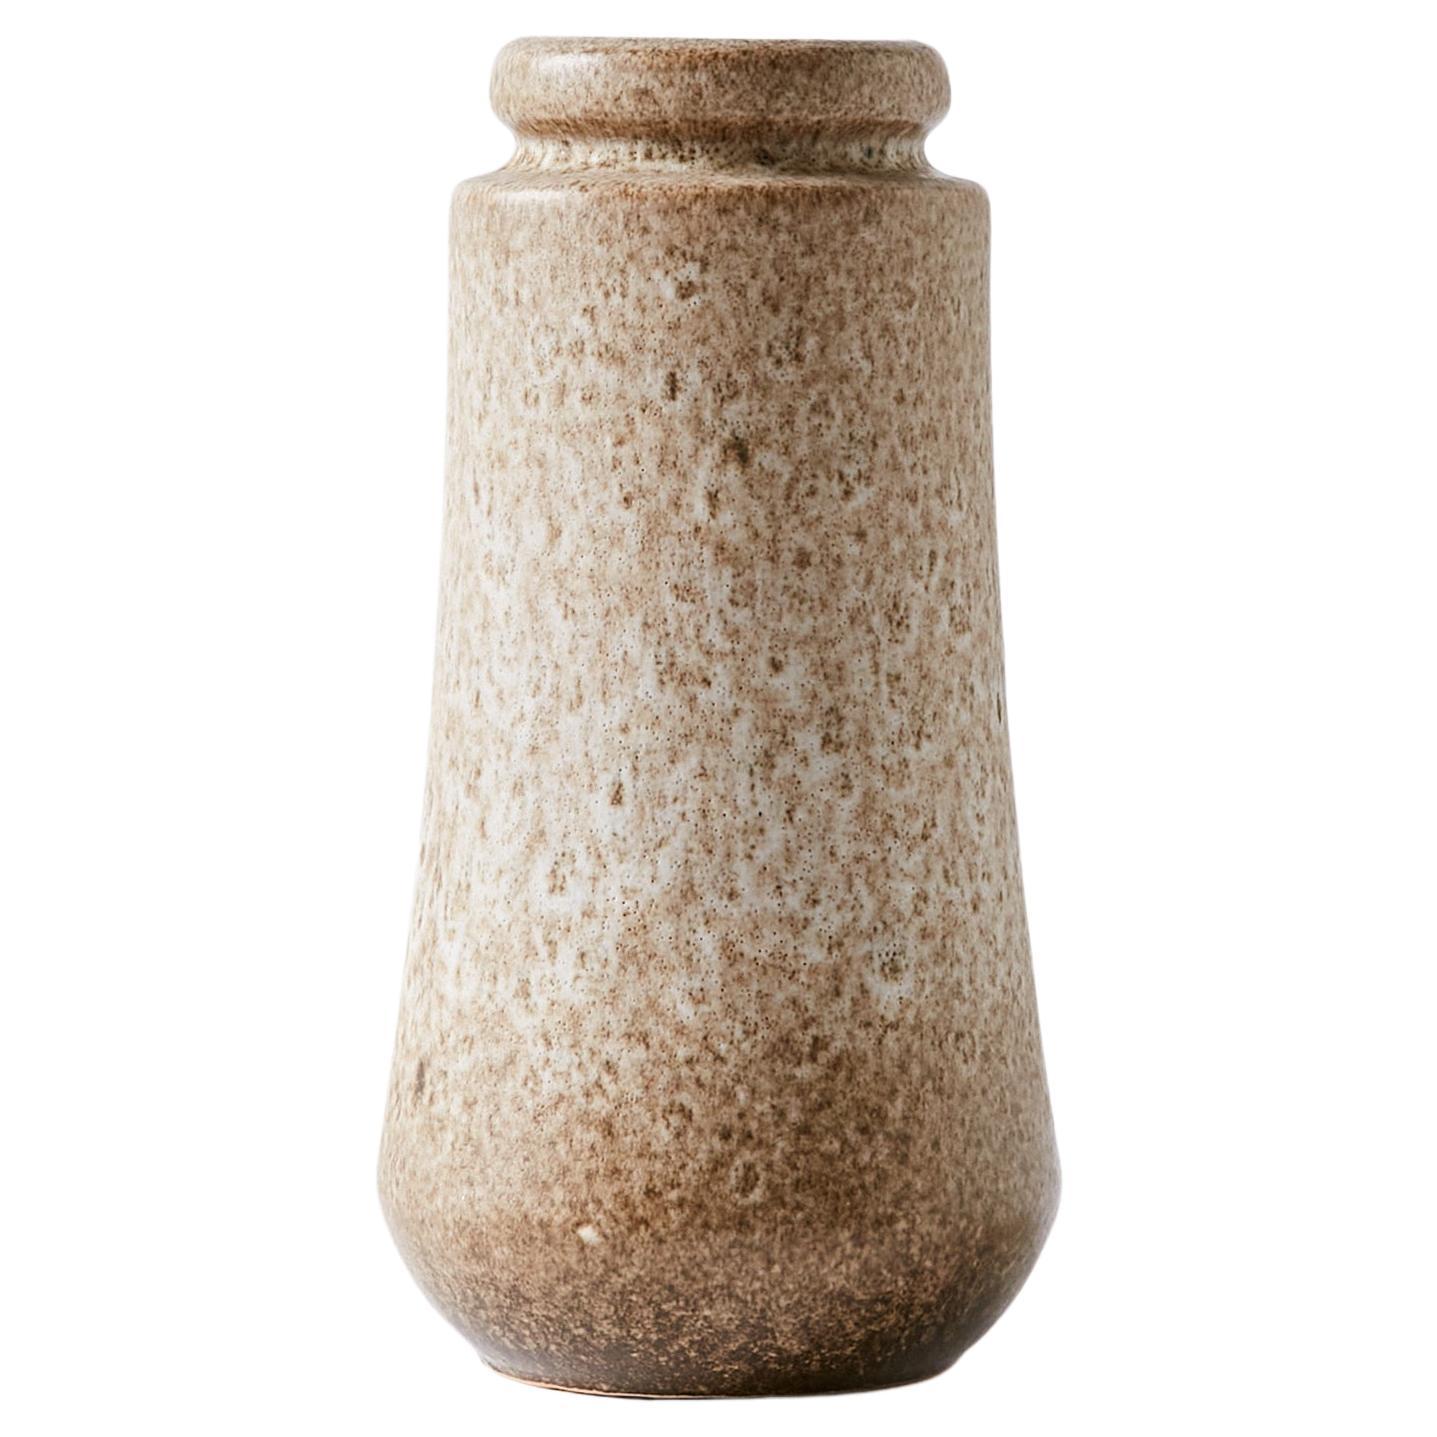 Fat Lava Vase with Textured Sand Tones, West Germany, 1960s For Sale